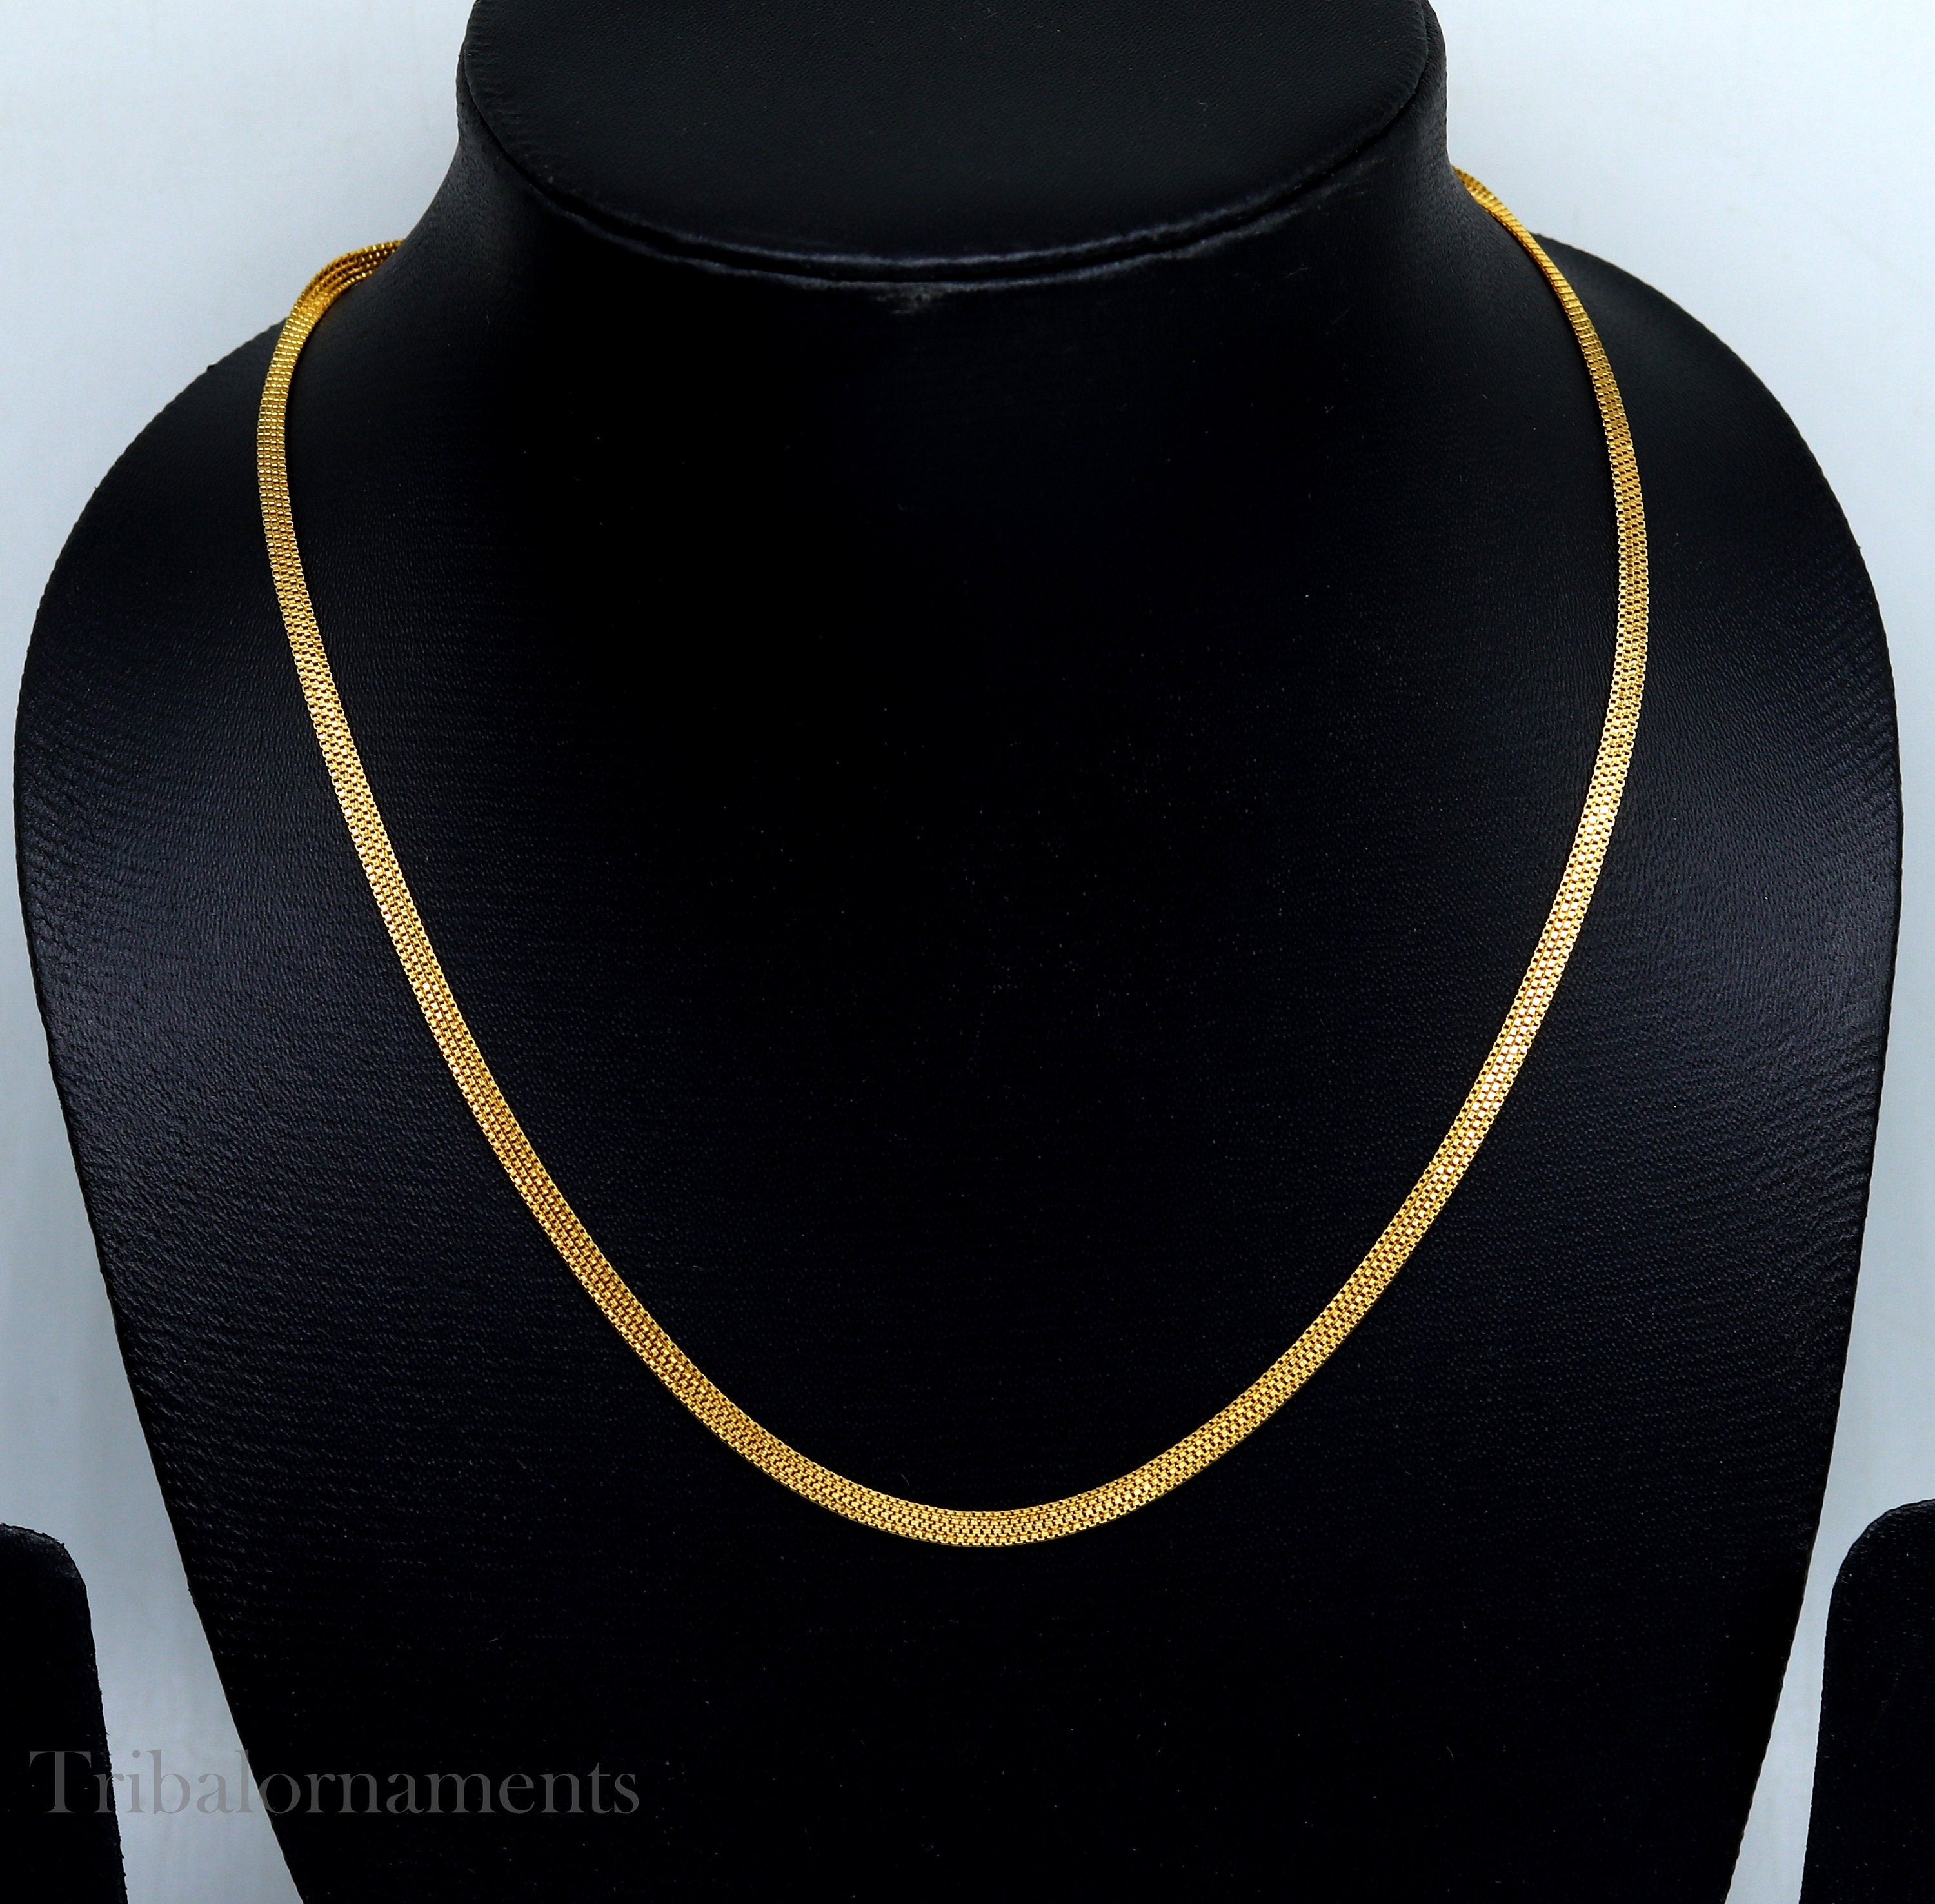 ARY D'PO • Round Box Chain Necklace in 18K Yellow Gold 2.5mm